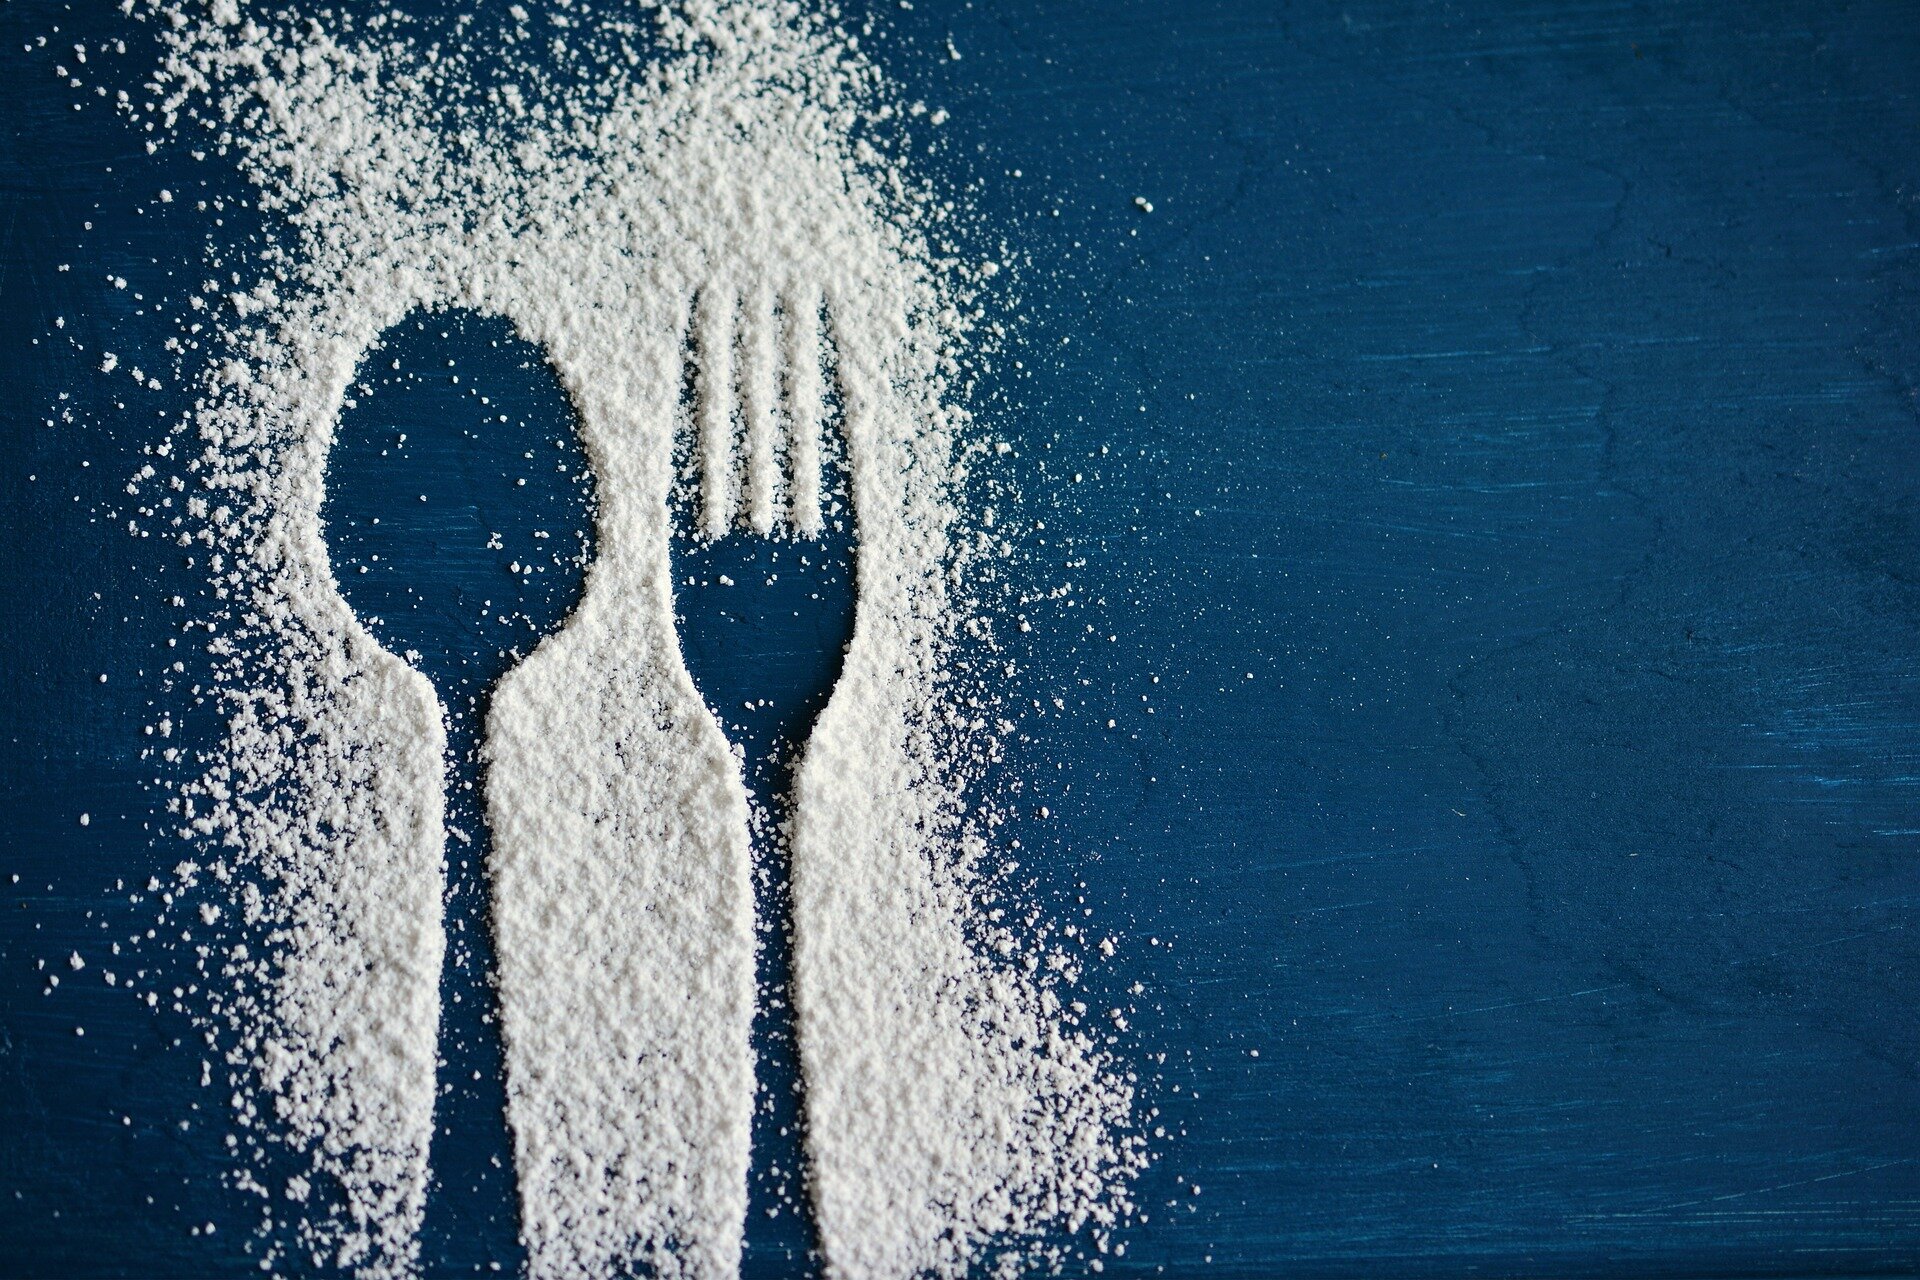 New Study Links Xylitol, a Common Sugar Substitute, to Increased Risk of Cardiovascular Events